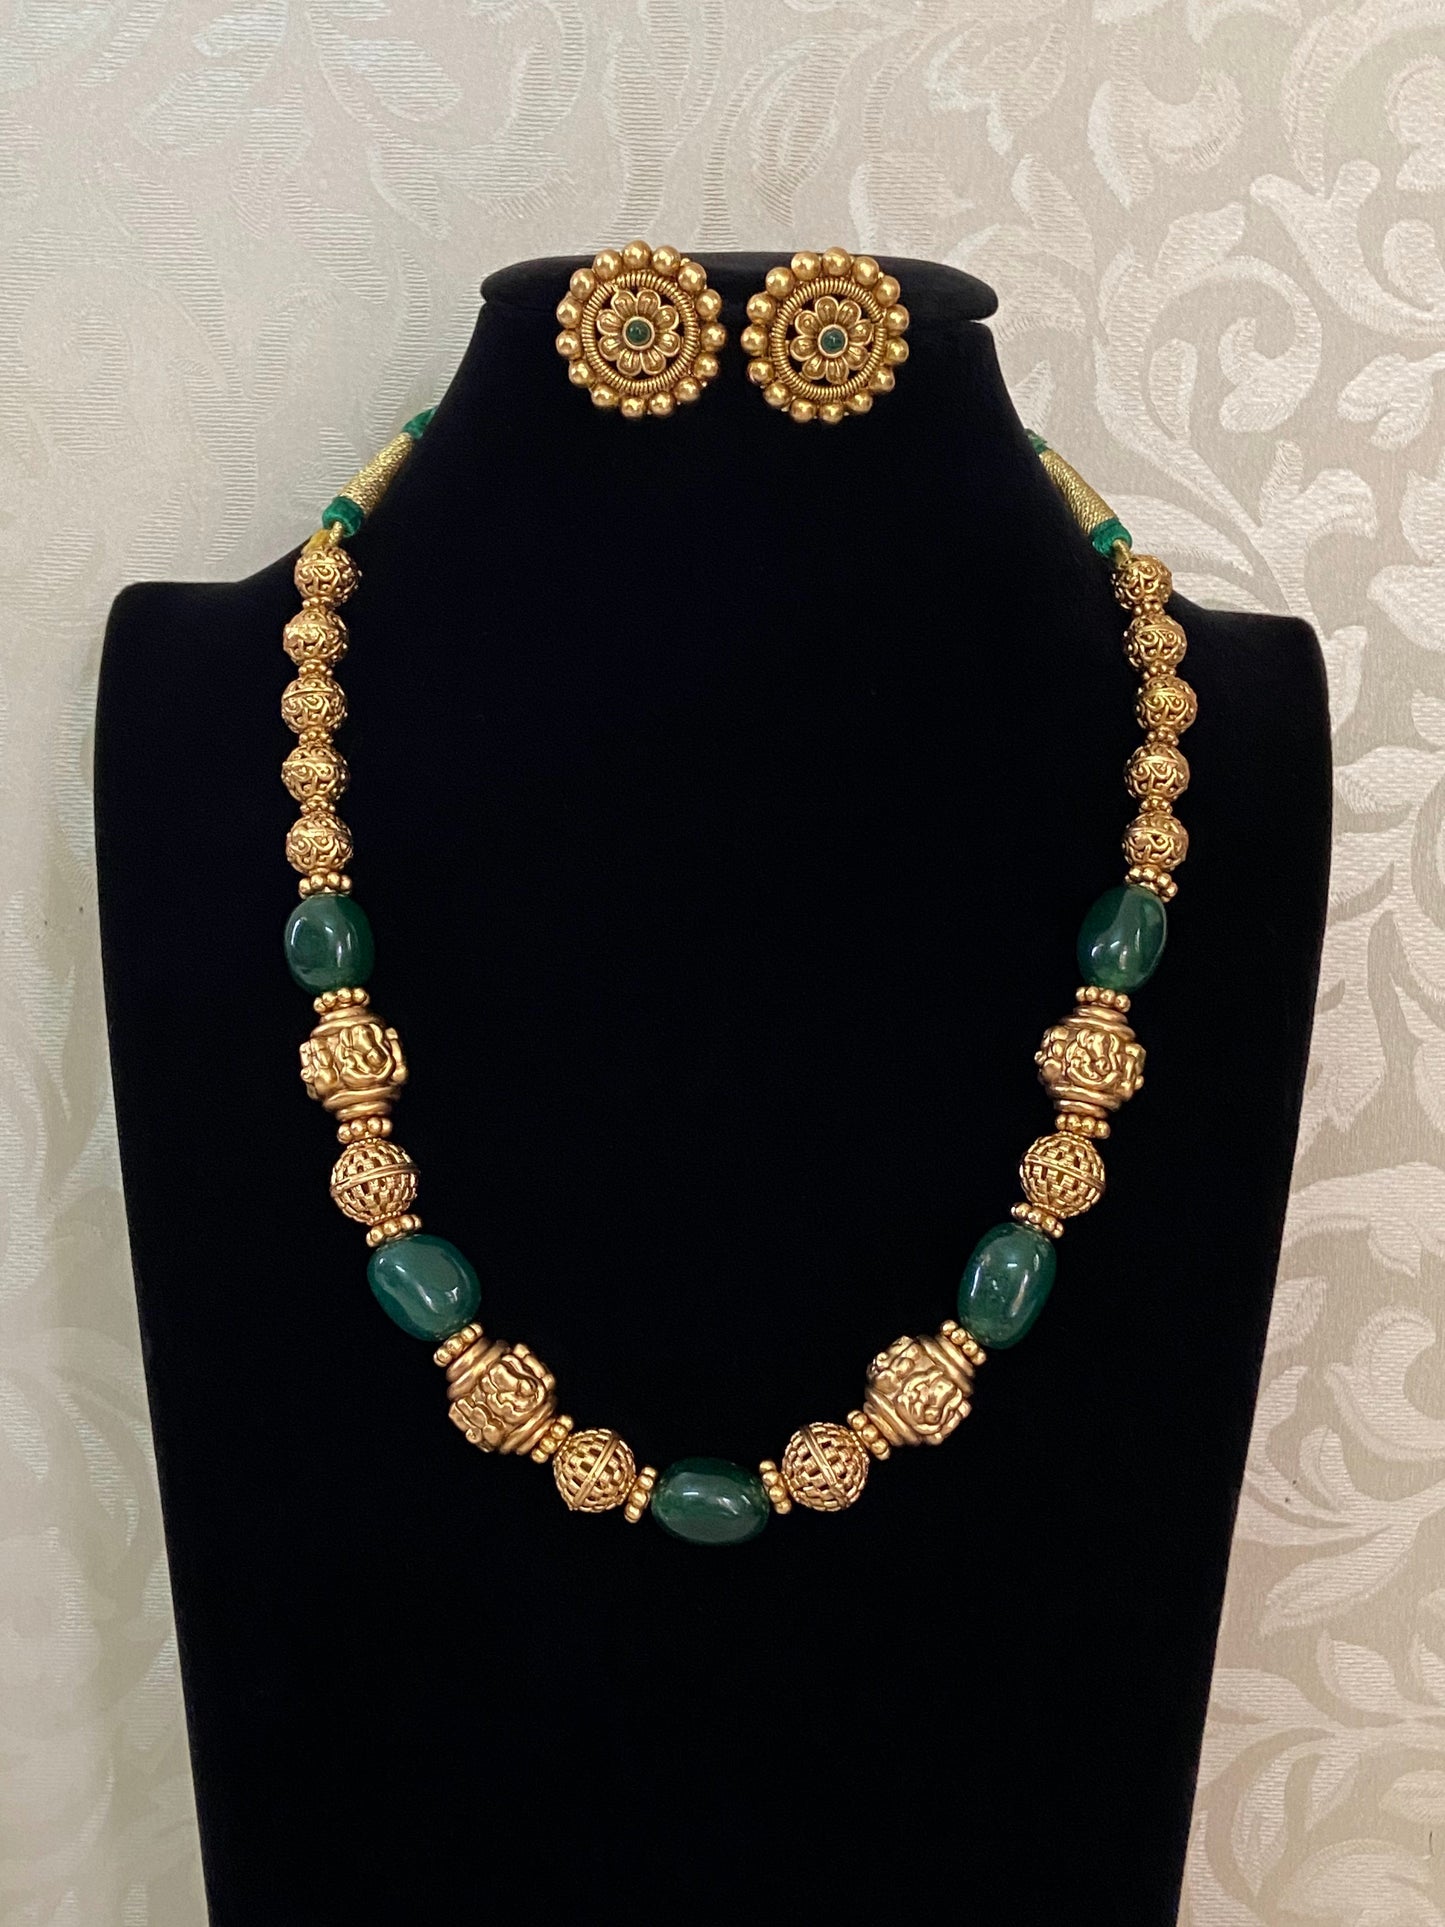 Antique traditional necklace | Latest Indian jewelry